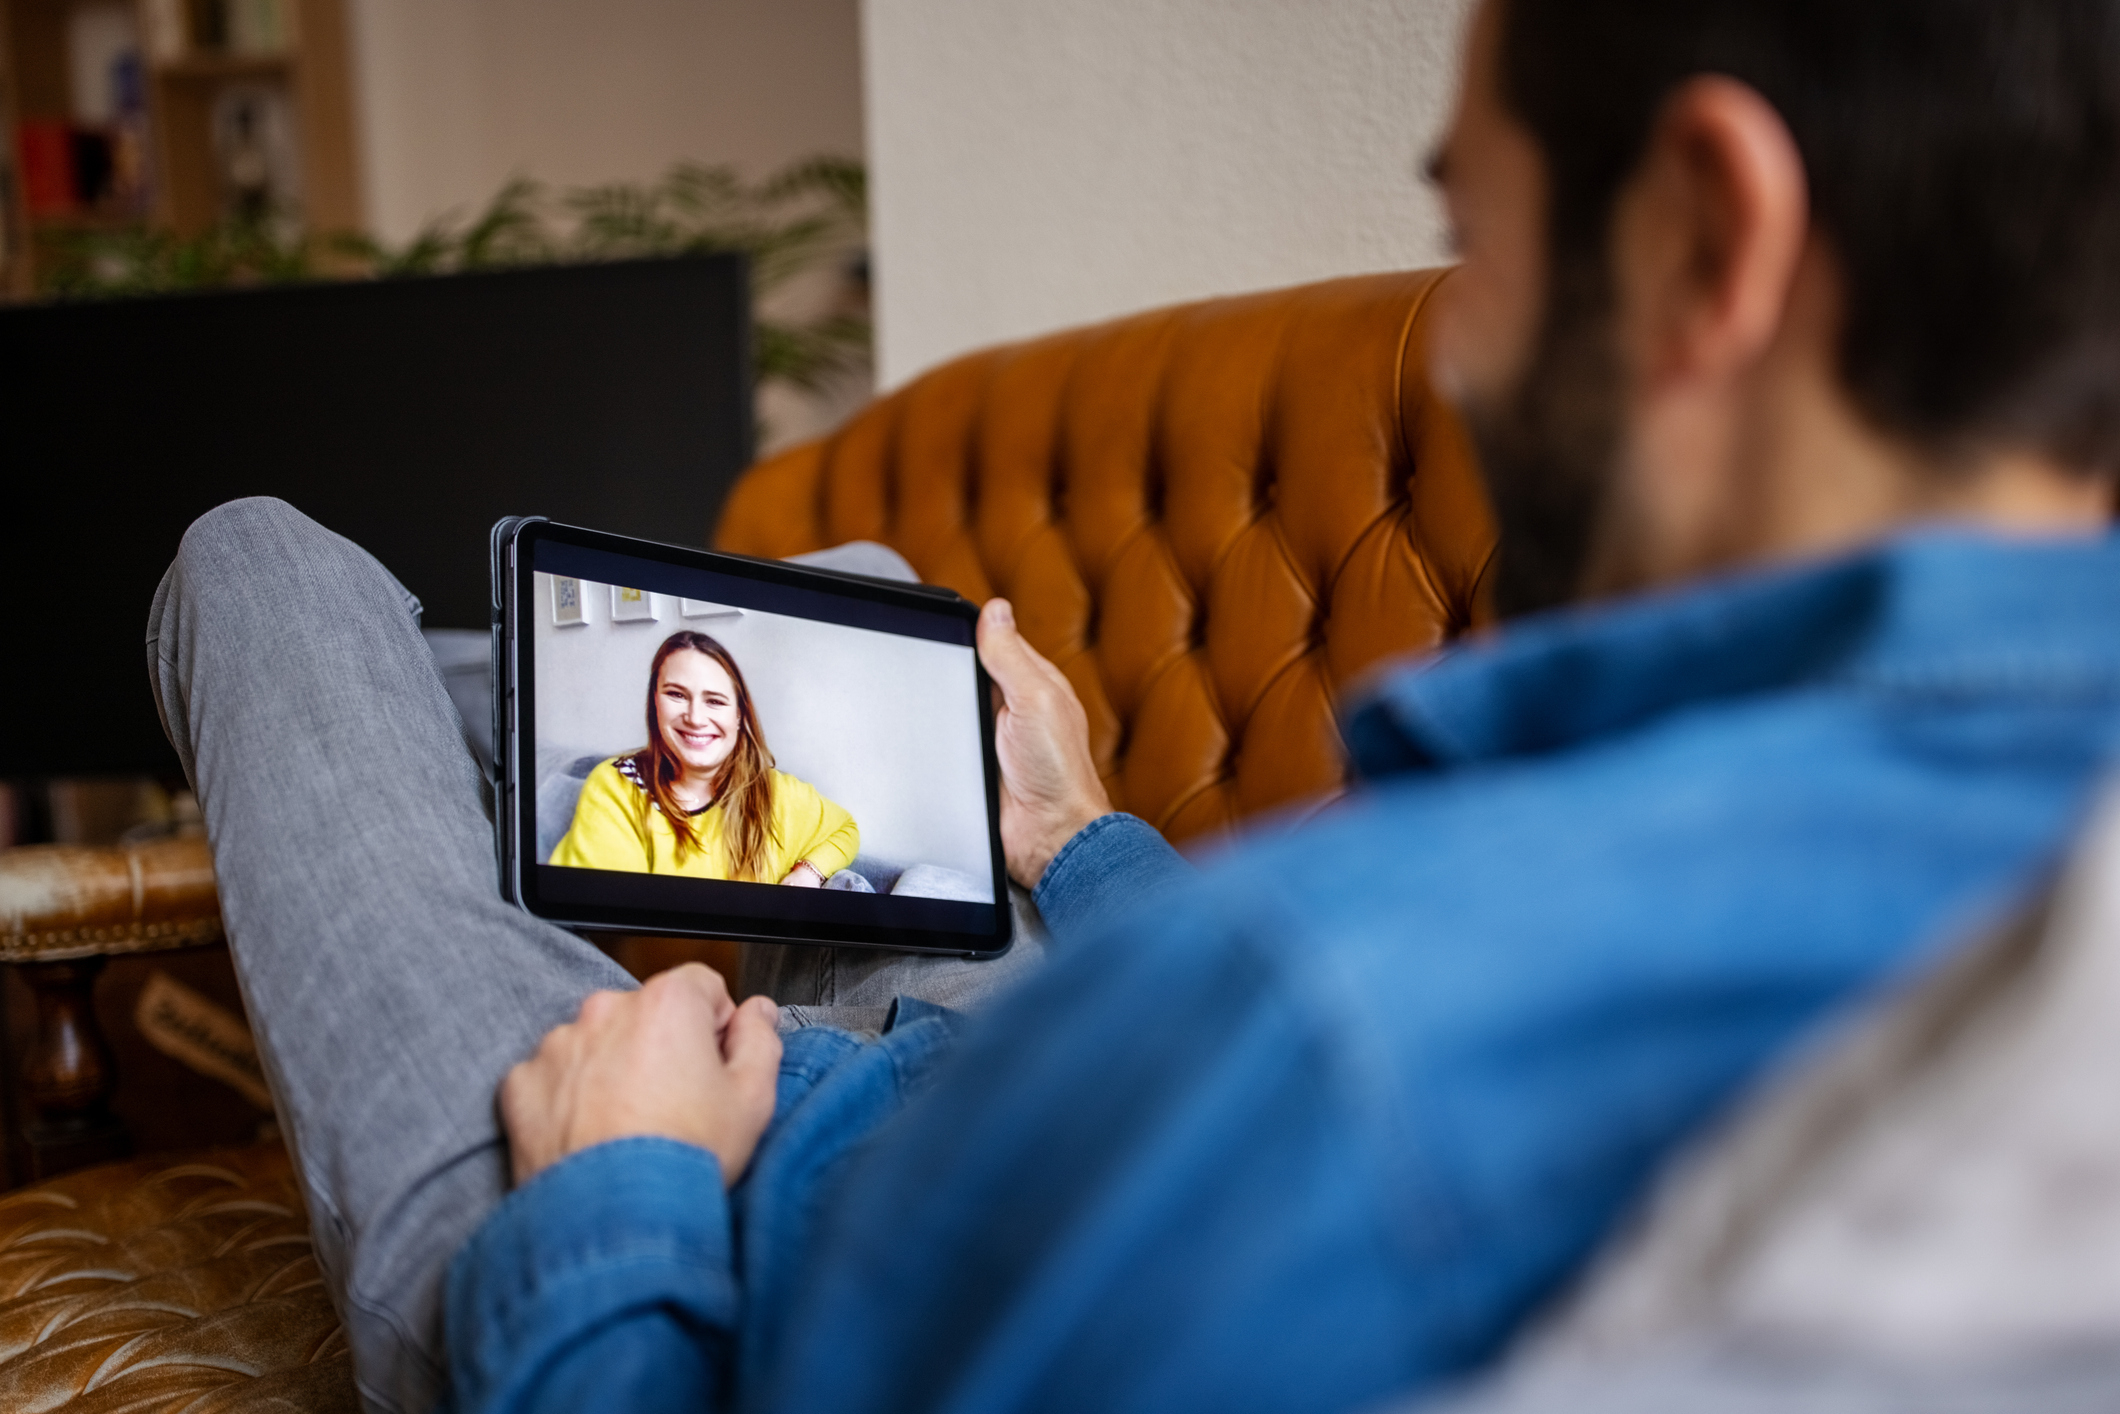 A person is reclining on a couch, holding a tablet showing a video call with a smiling woman wearing a casual top